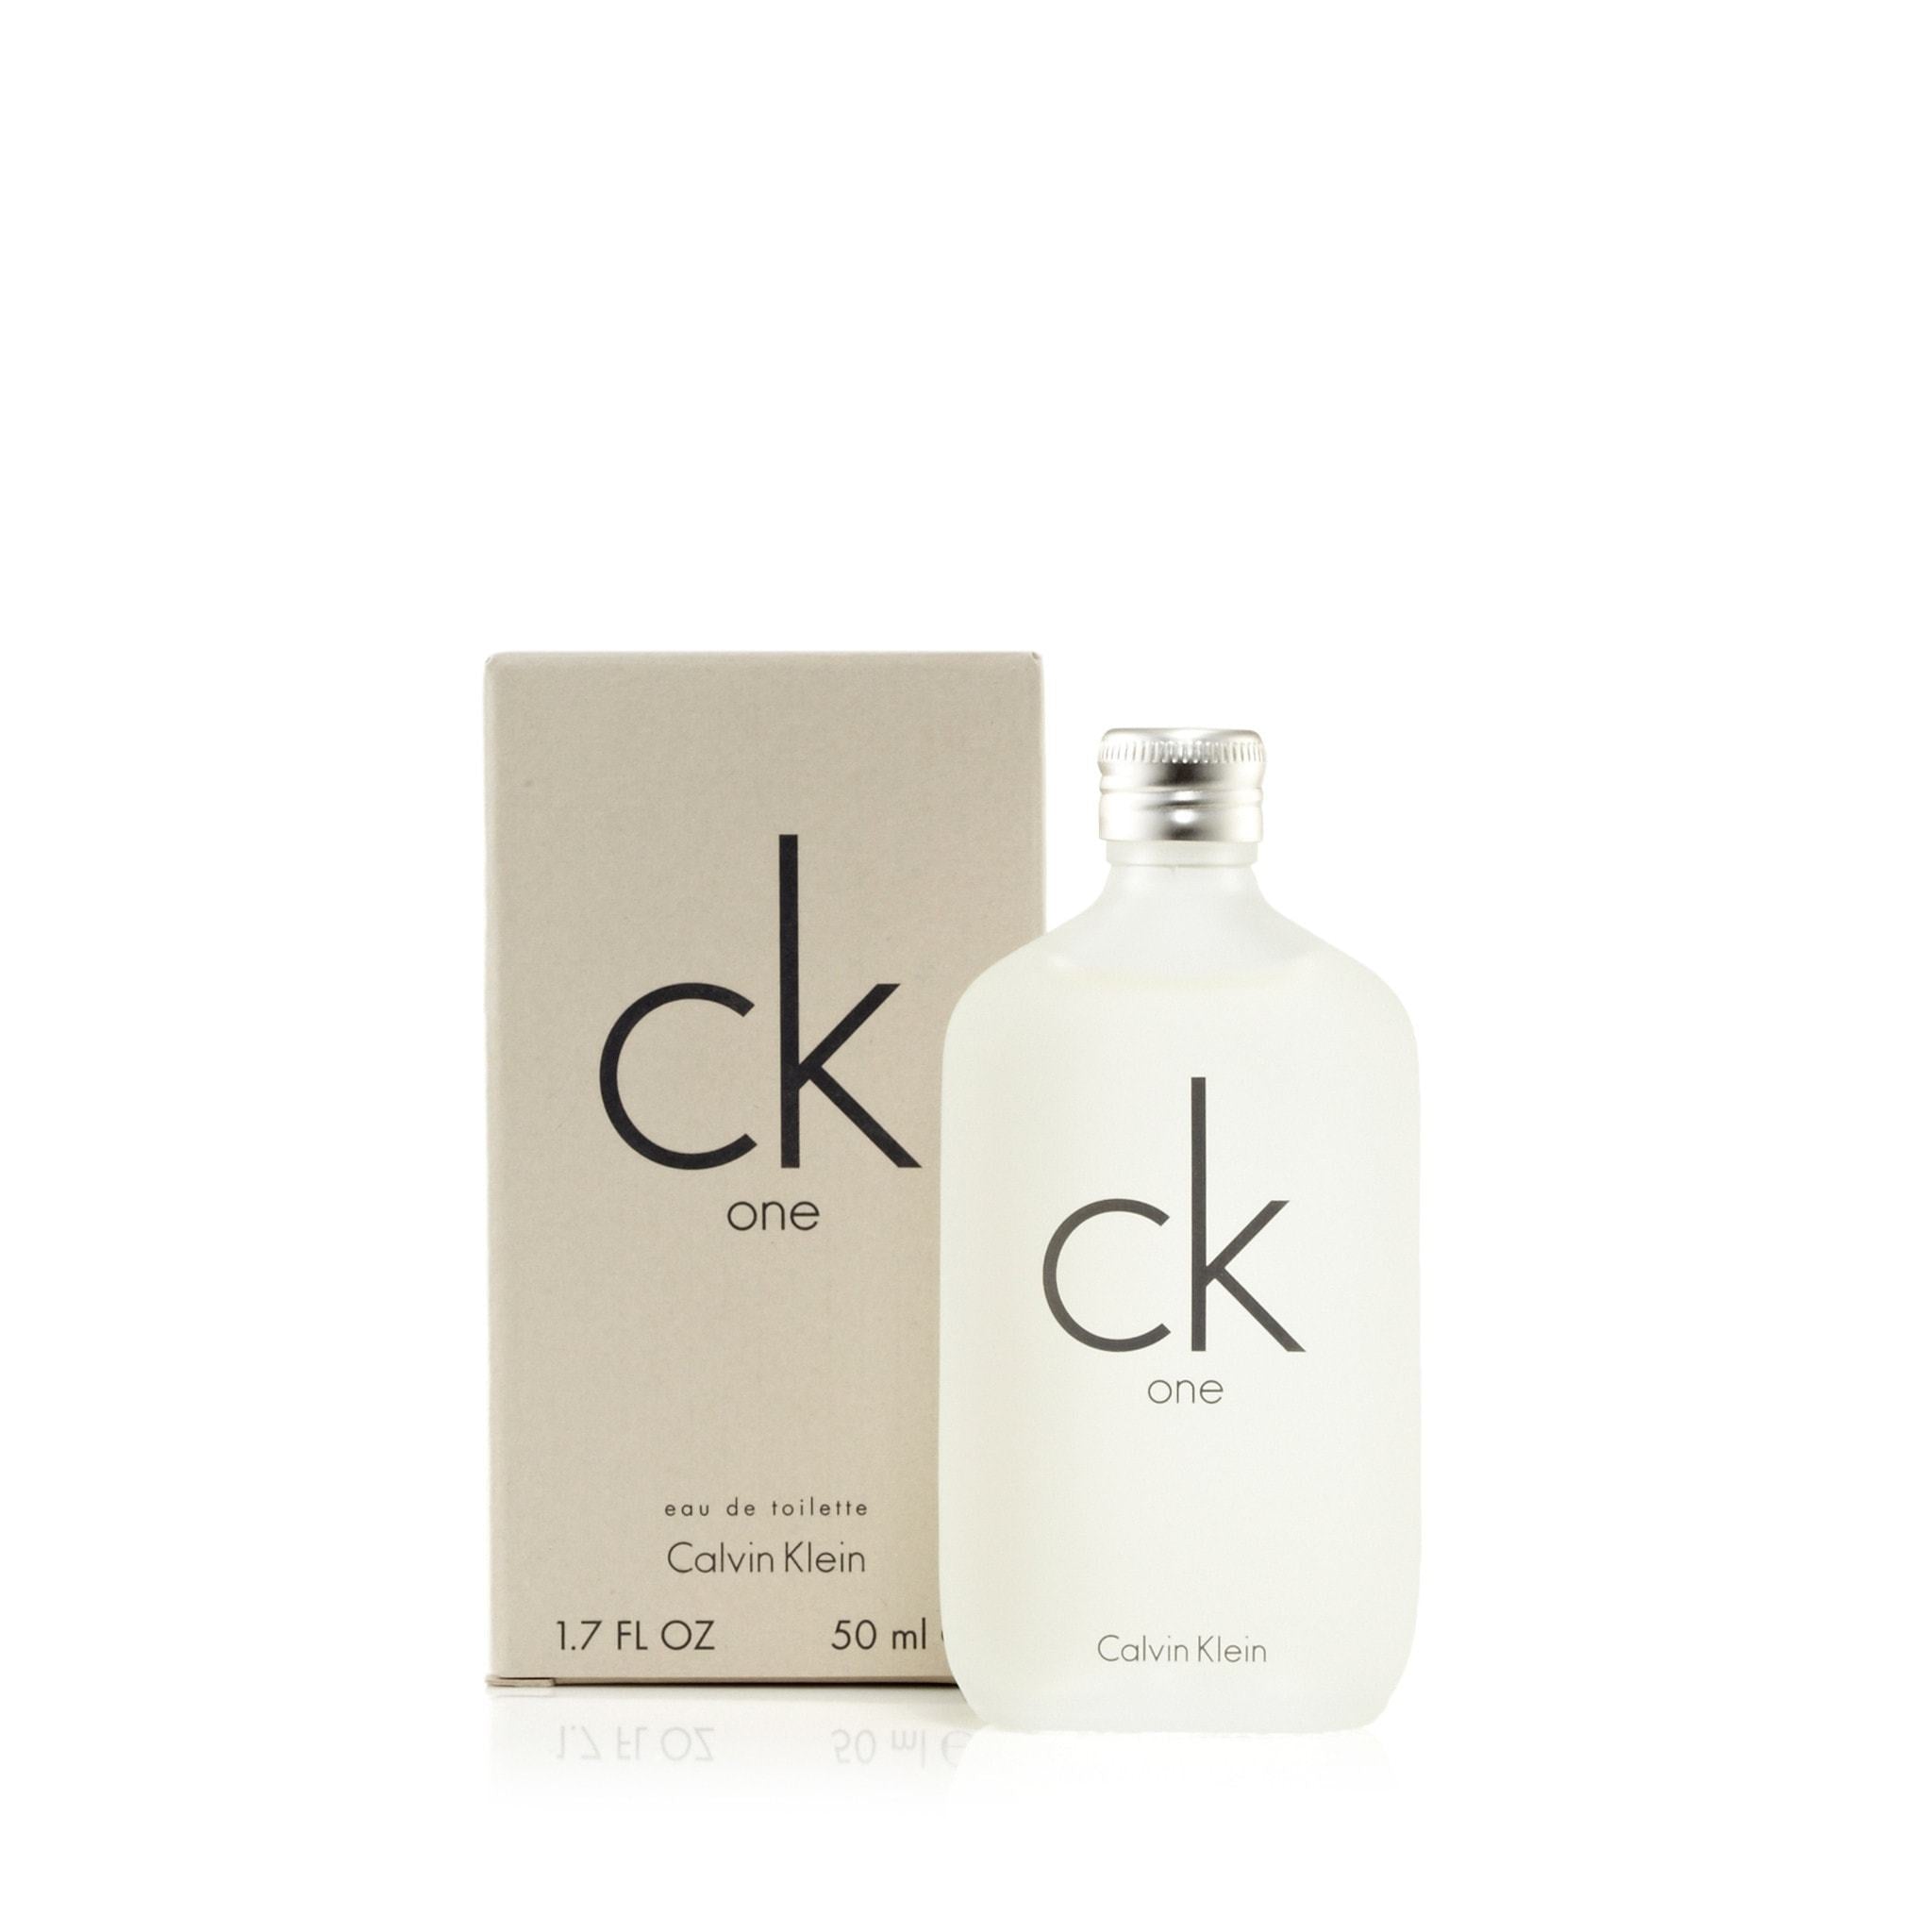 Cologne EDT CK Calvin And Klein Perfumania – Women For One Men